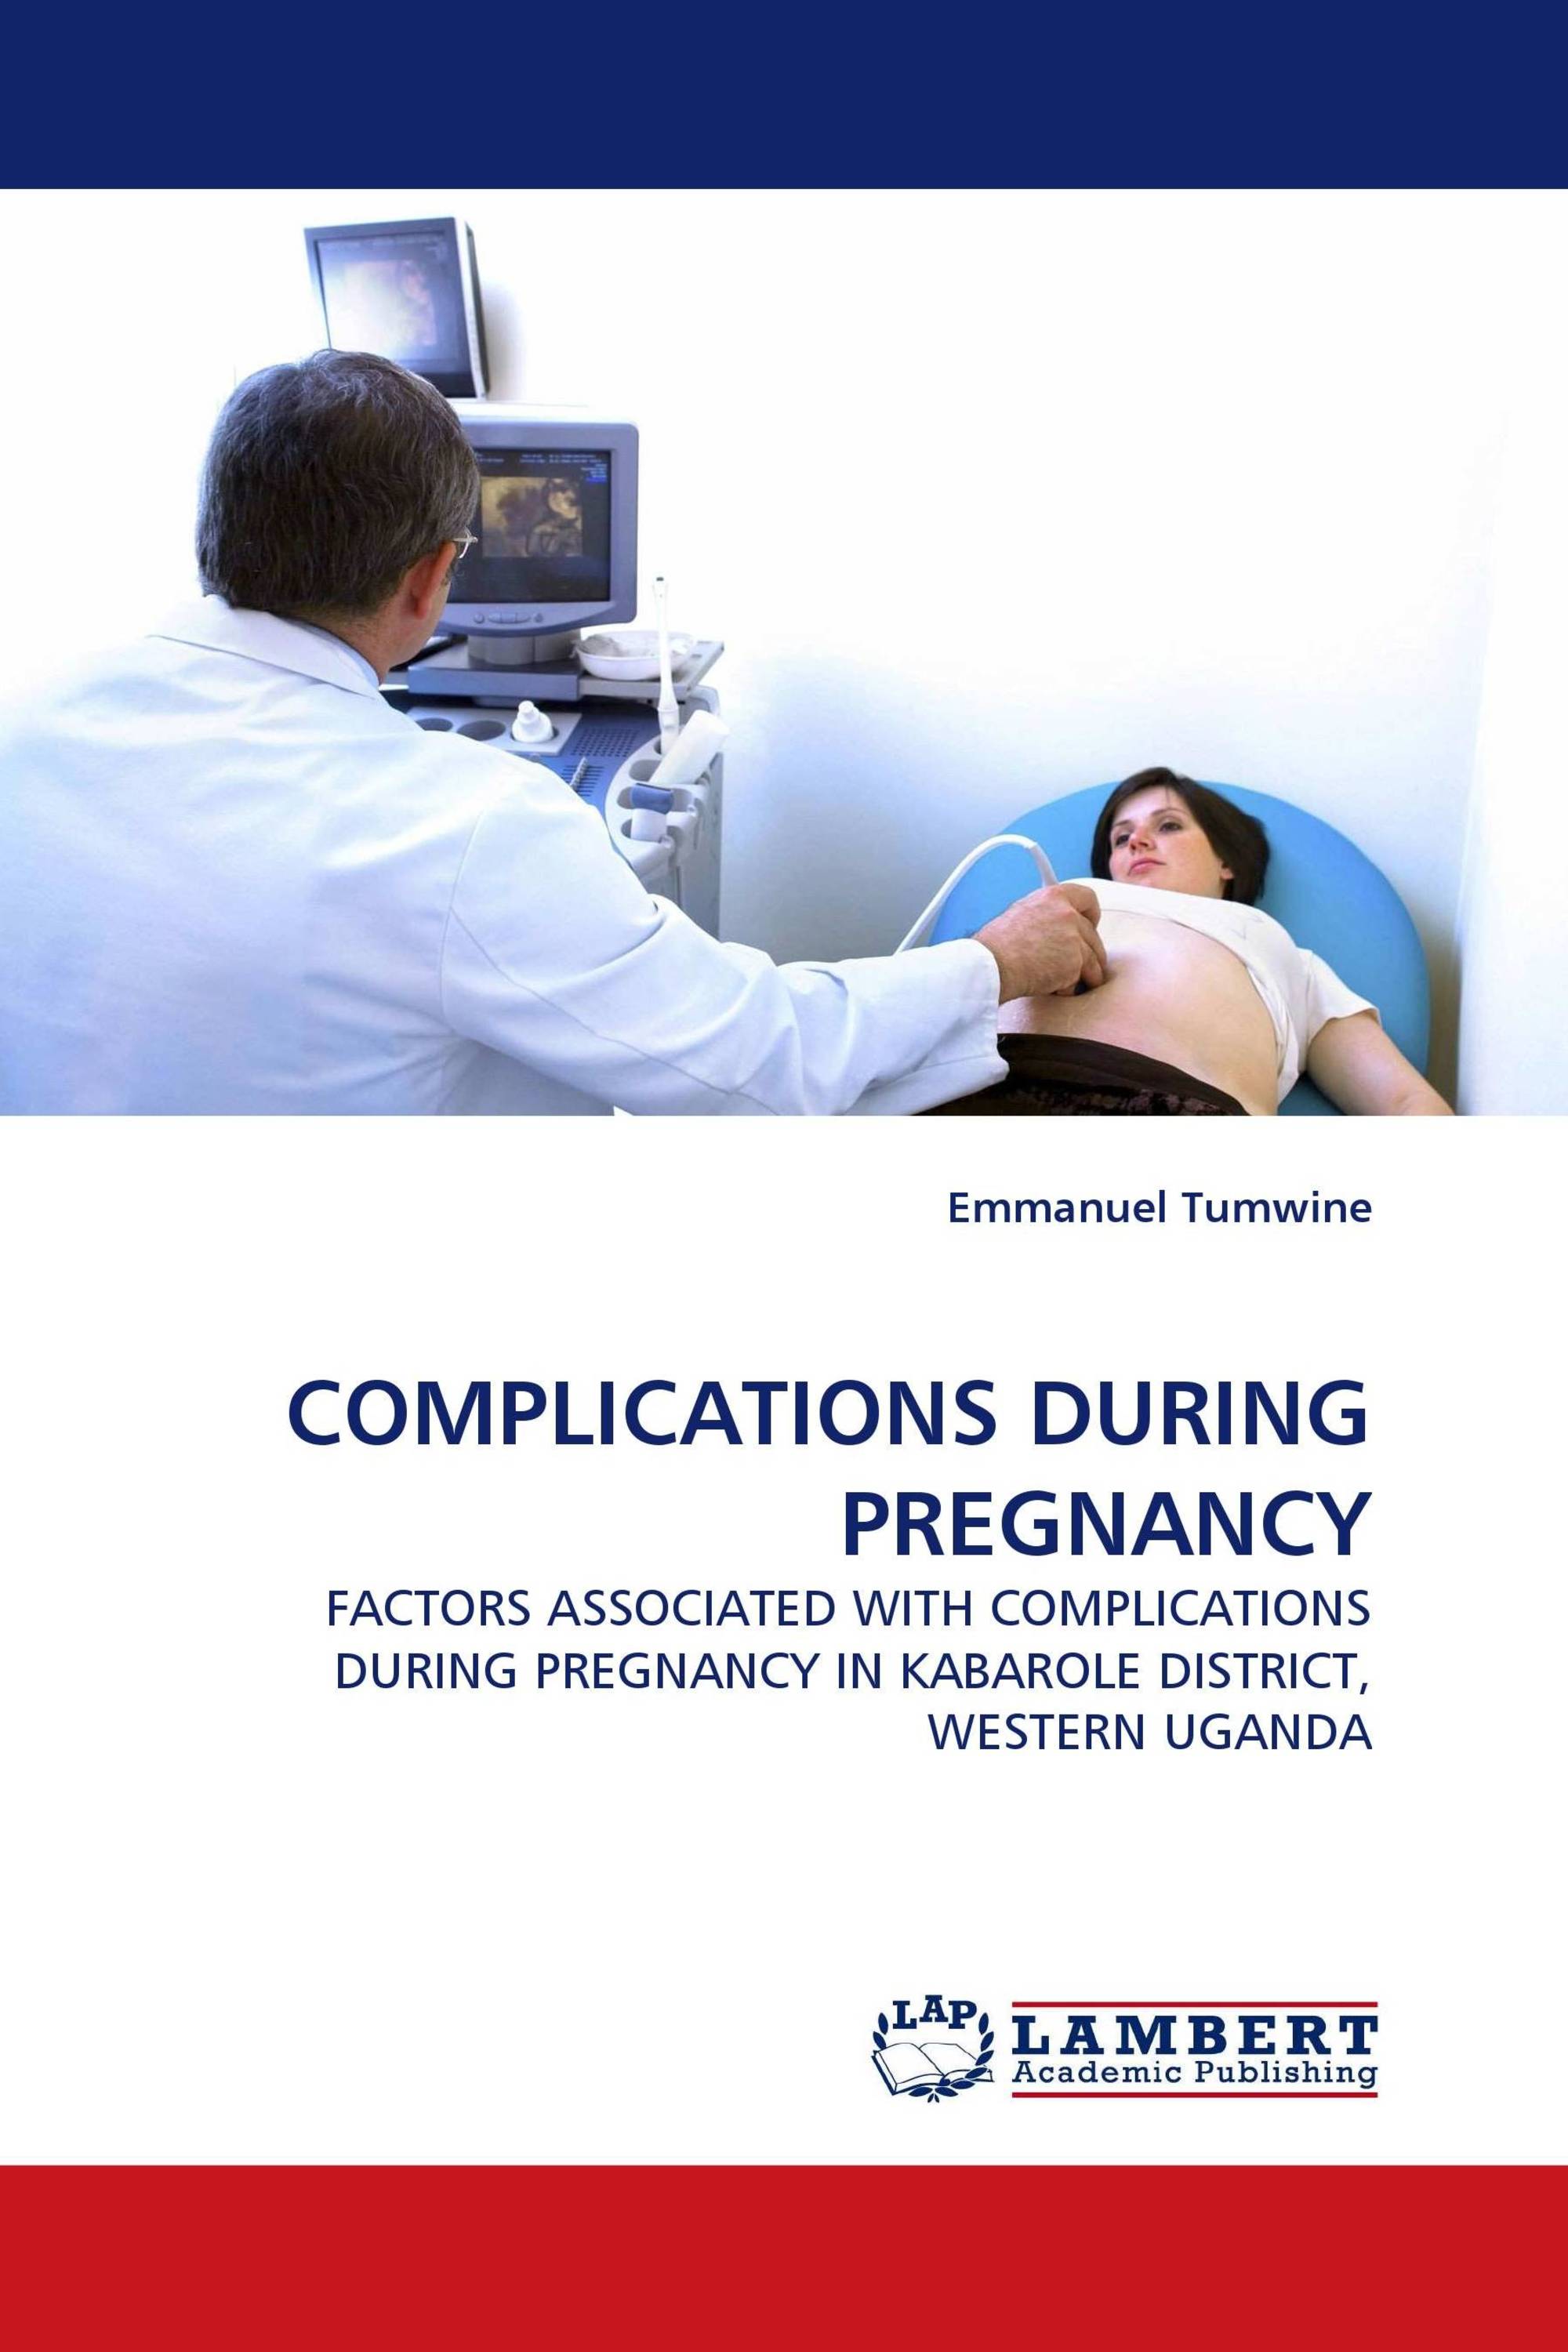 COMPLICATIONS DURING PREGNANCY